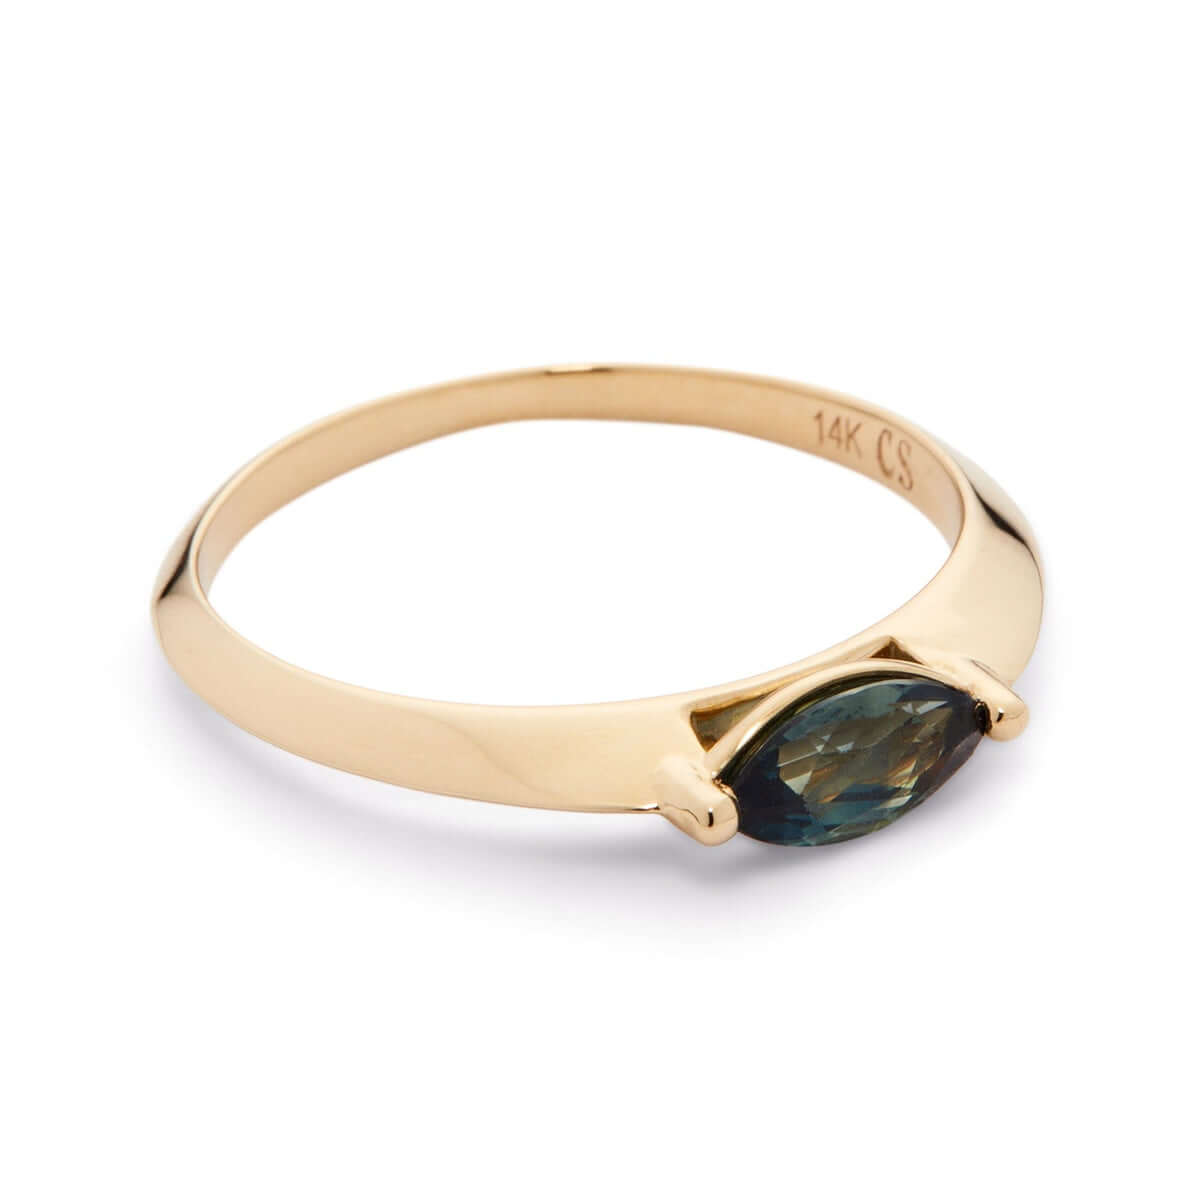 A side view of a yellow gold ring with a marquise-cut Australian sapphire on white.